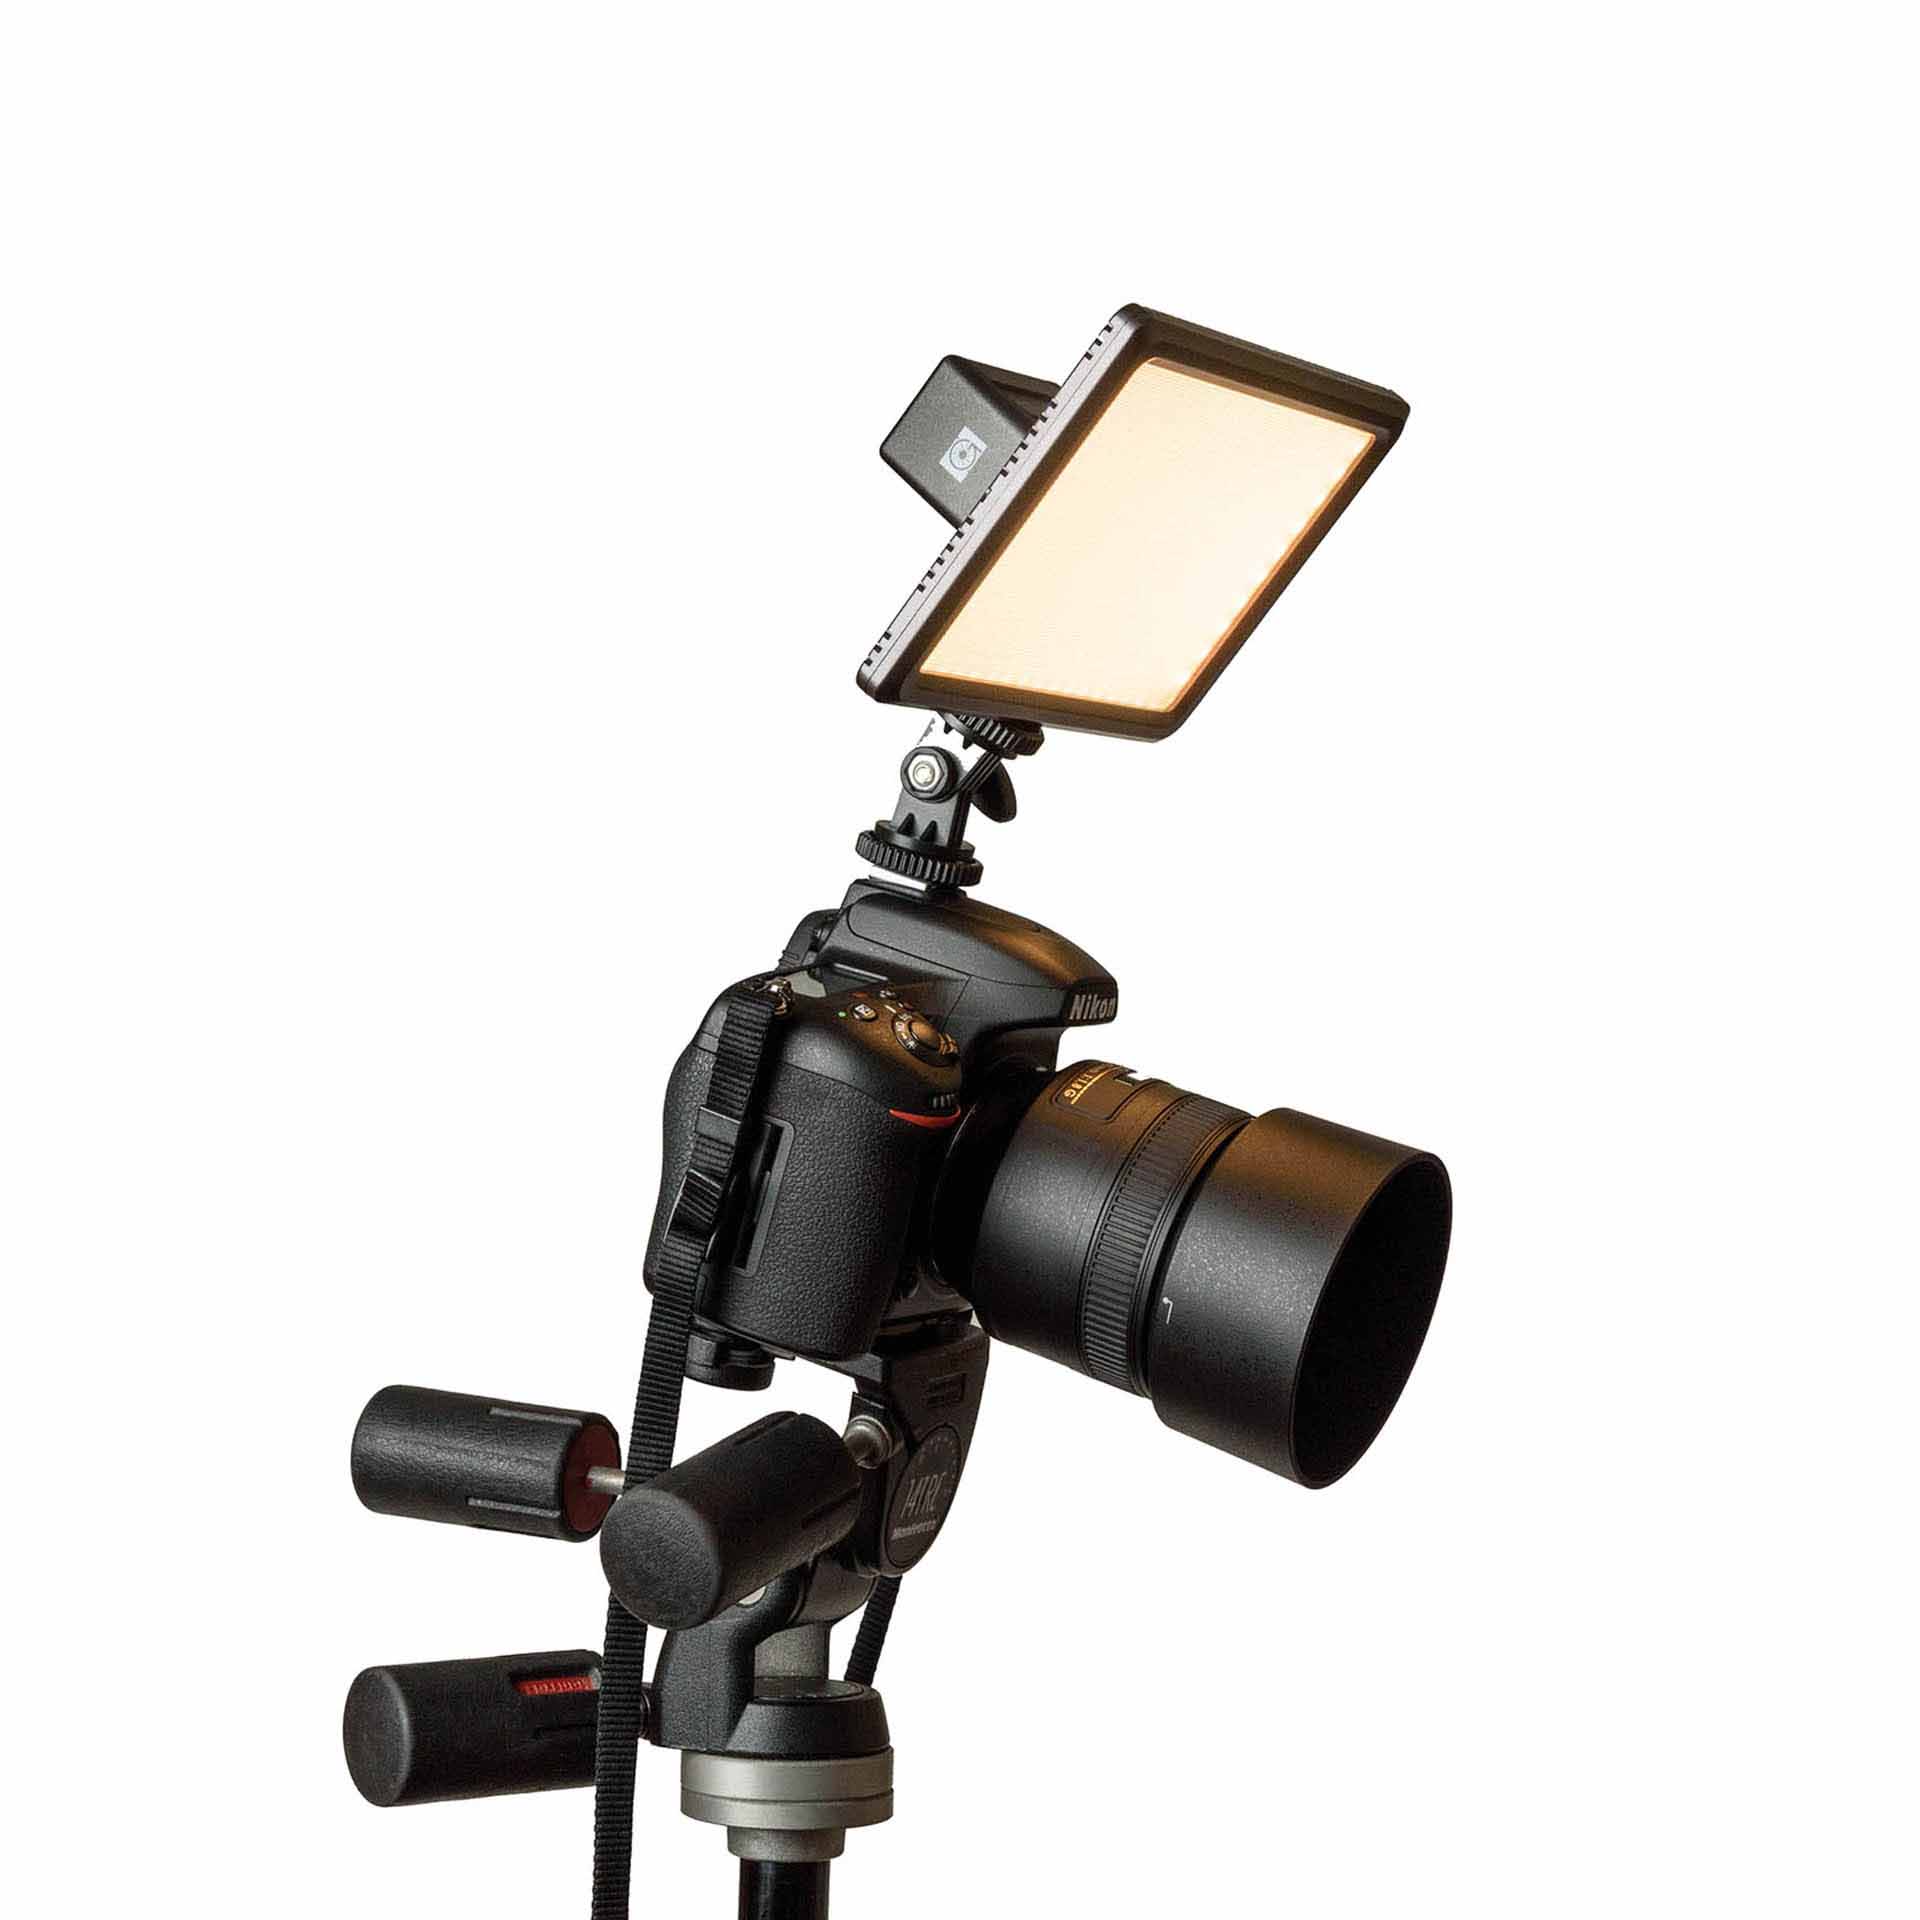 NanGuang launches three new portable LED-lights: Digital Photography Review